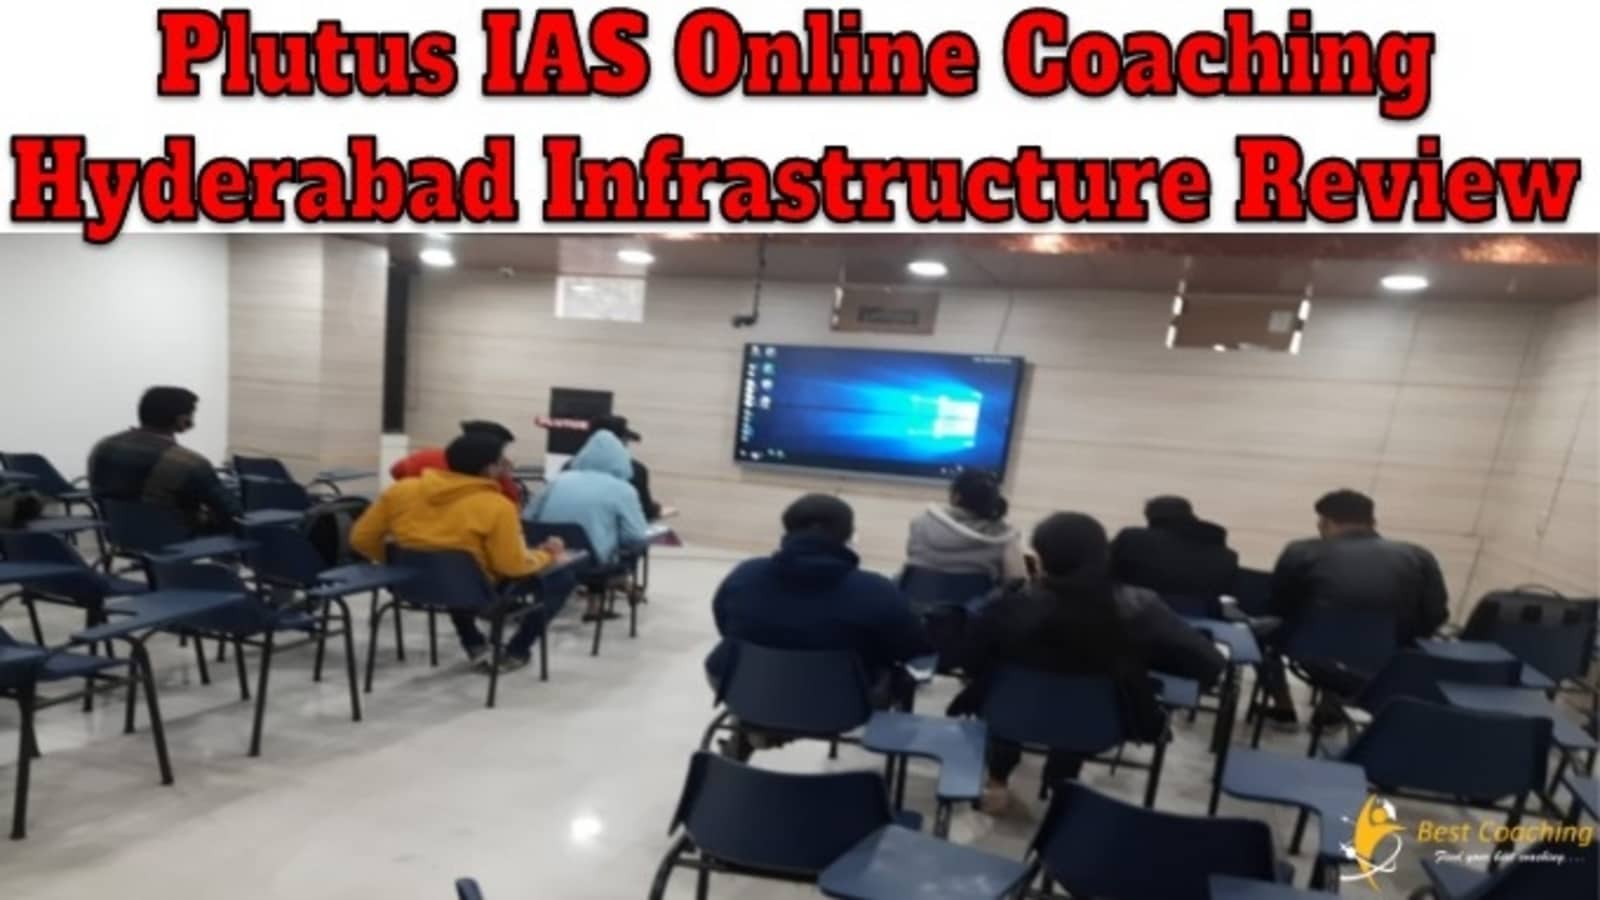 Plutus IAS Online Coaching Hyderabad Infrastructure Review